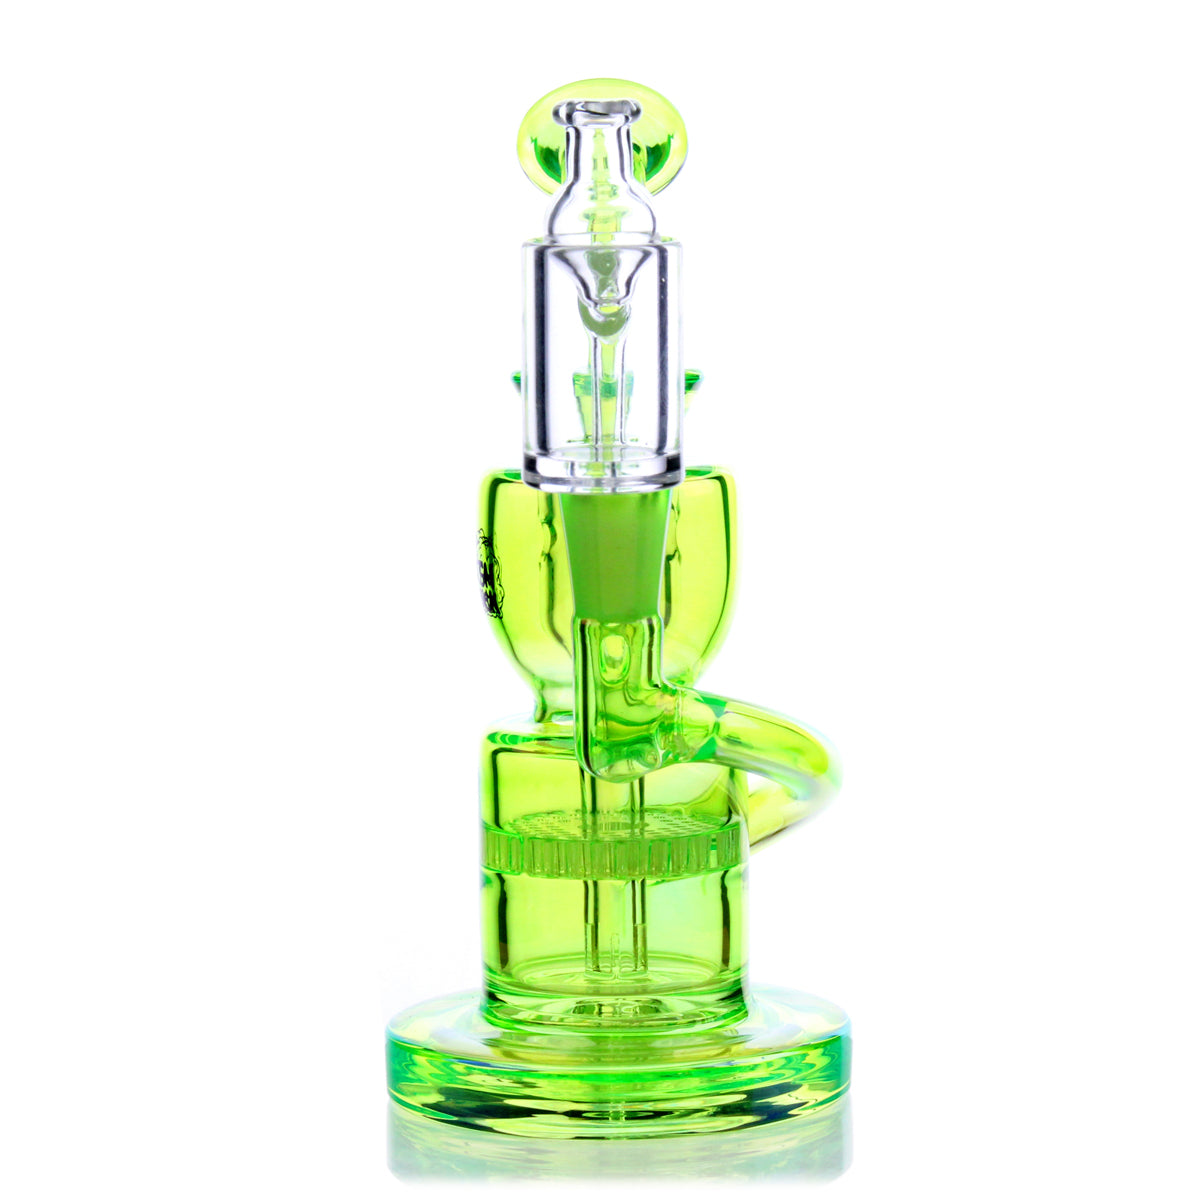 Dahlia Mini Rig in vibrant green, compact 5.5" with honeycomb percolator, ideal for concentrates.